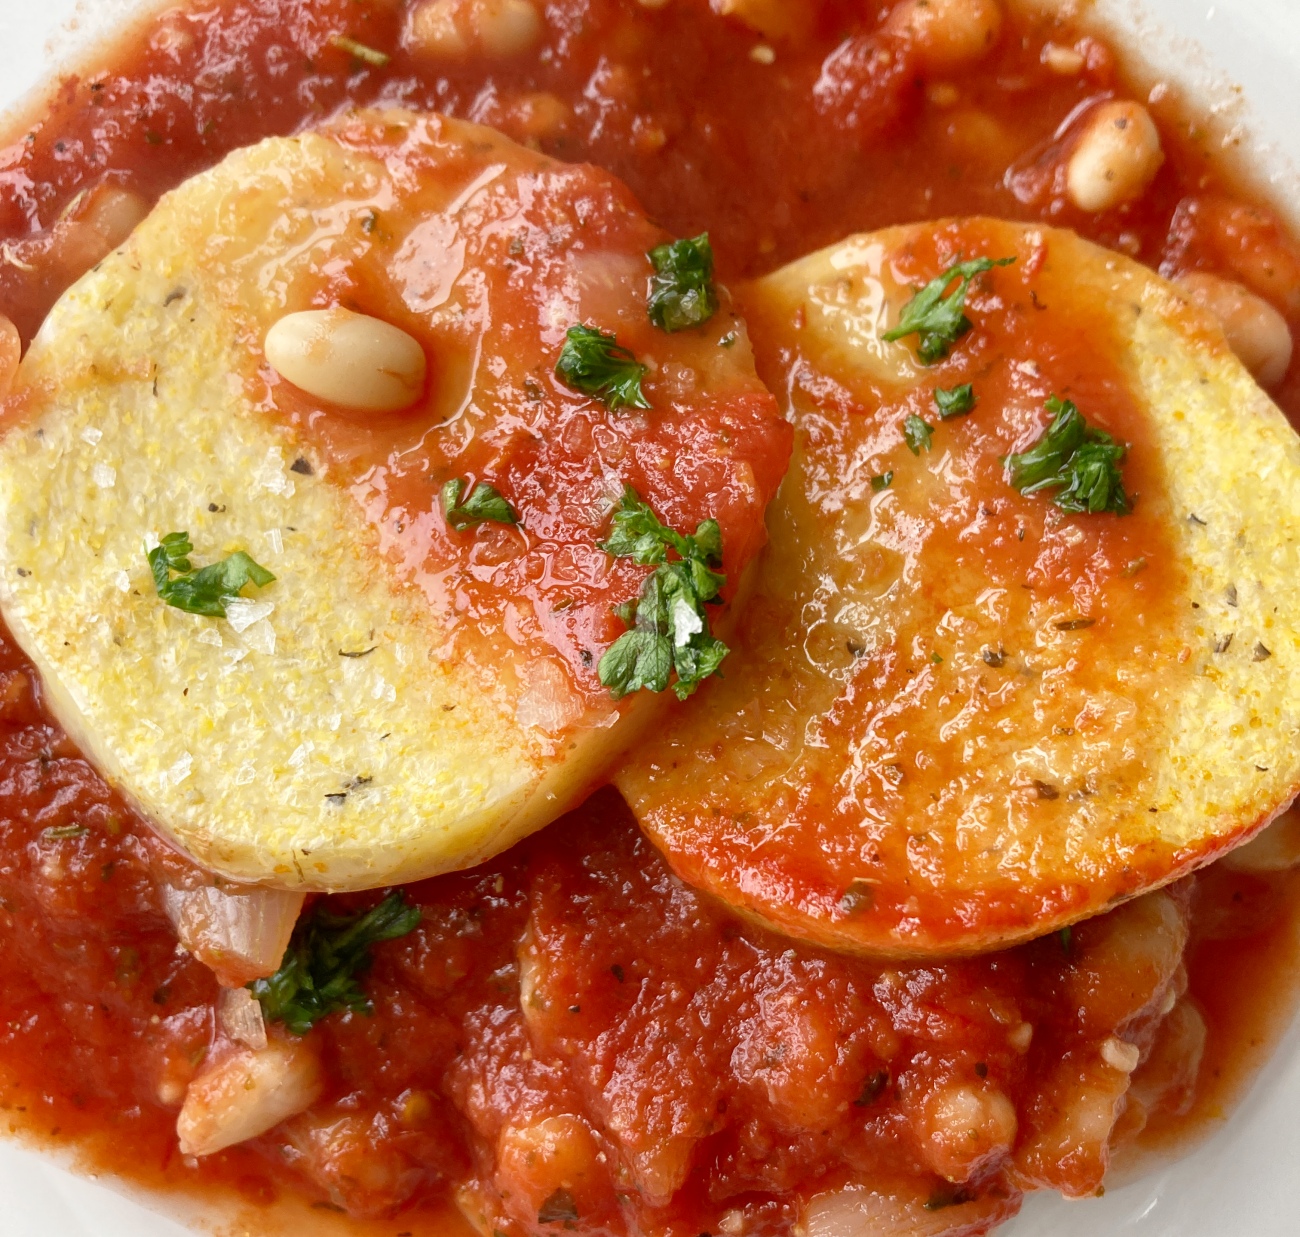 Broiled Polenta with Beans
